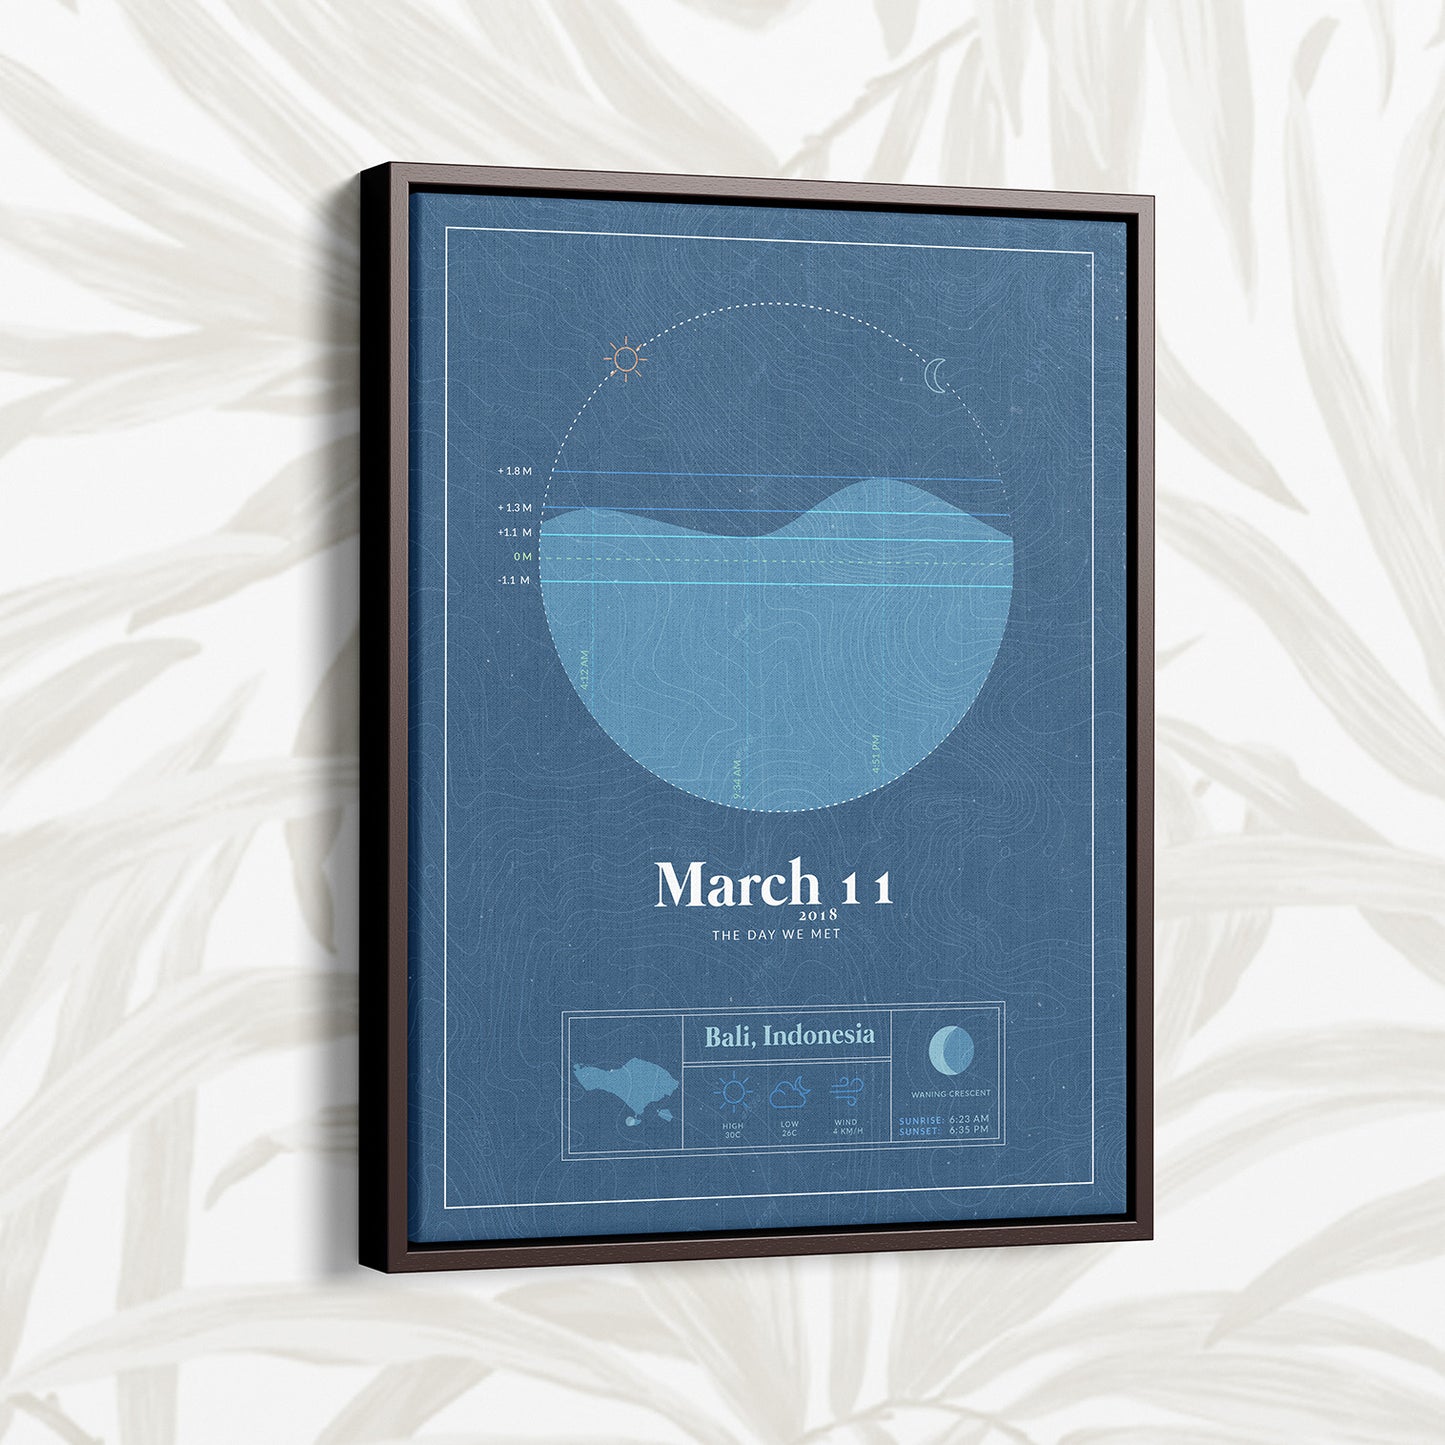 dark brown framed floating canvas of the personalized tide map by salt atlas in the vintage cobalt blue color in a home setting. These are custom posters showing the tide, weather, and moon phase for a special day, like an anniversary or birthday.